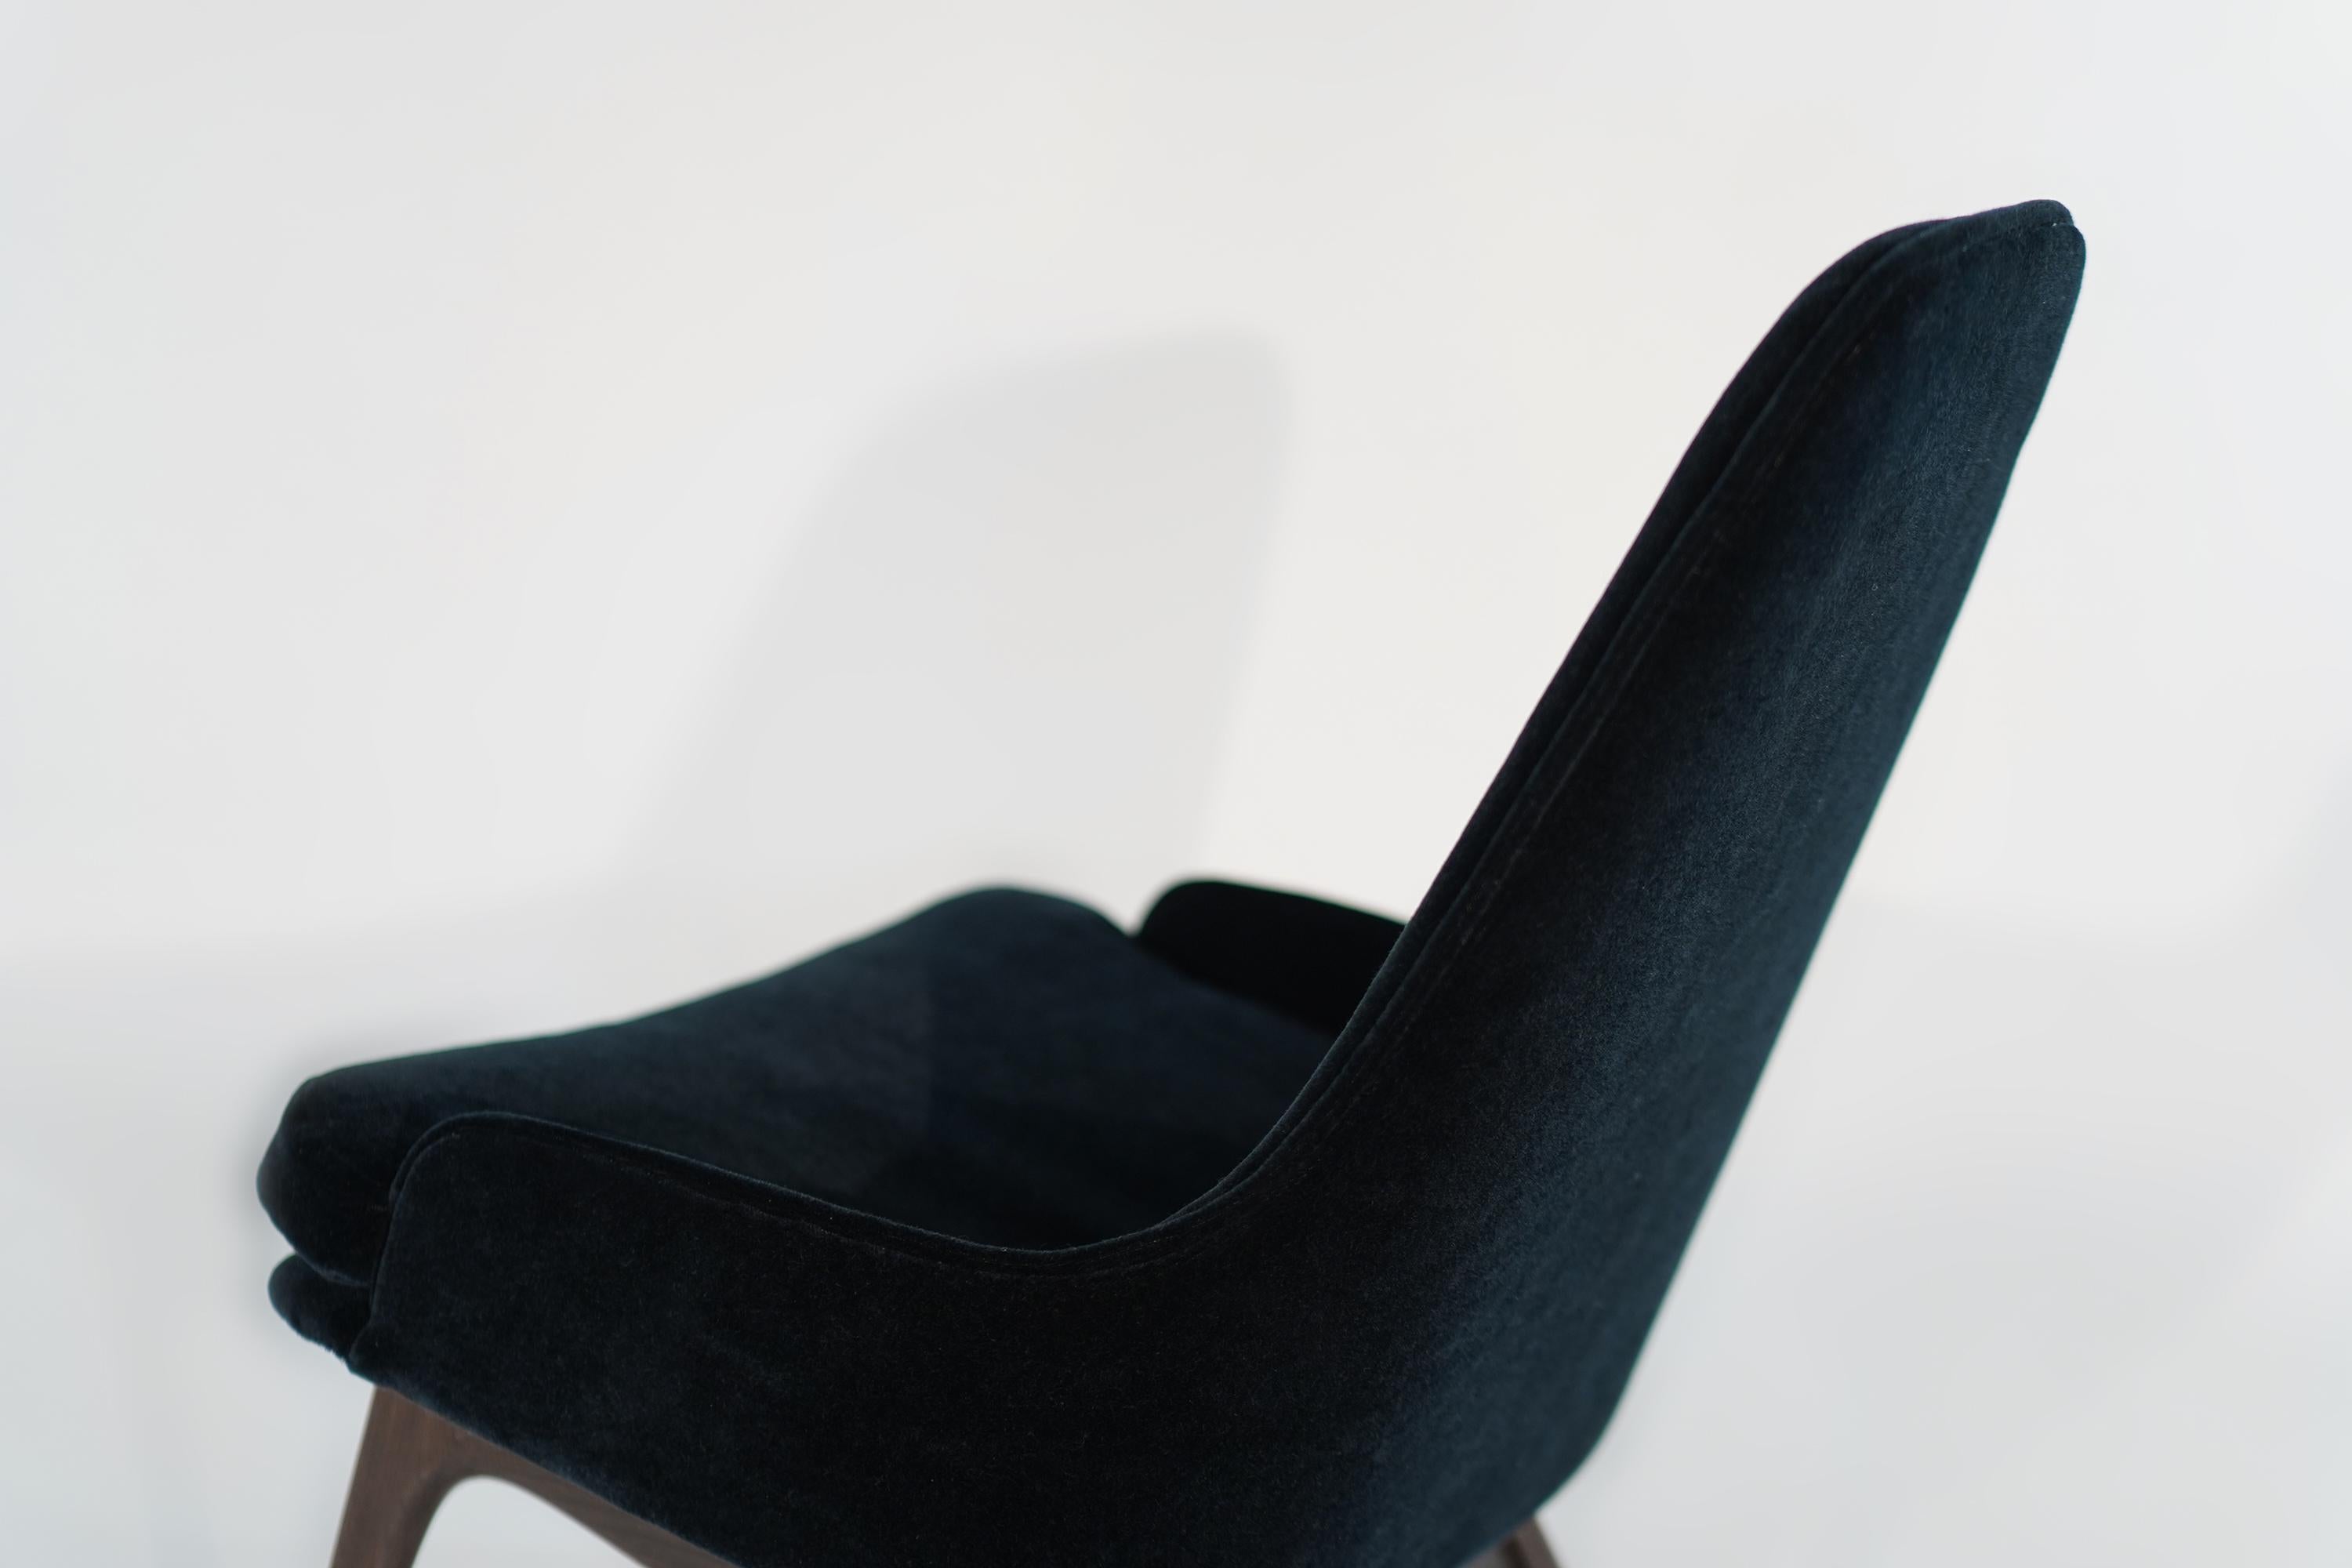 Set of Slipper Chairs by Adrian Pearsall in Navy Mohair, 1950s For Sale 1